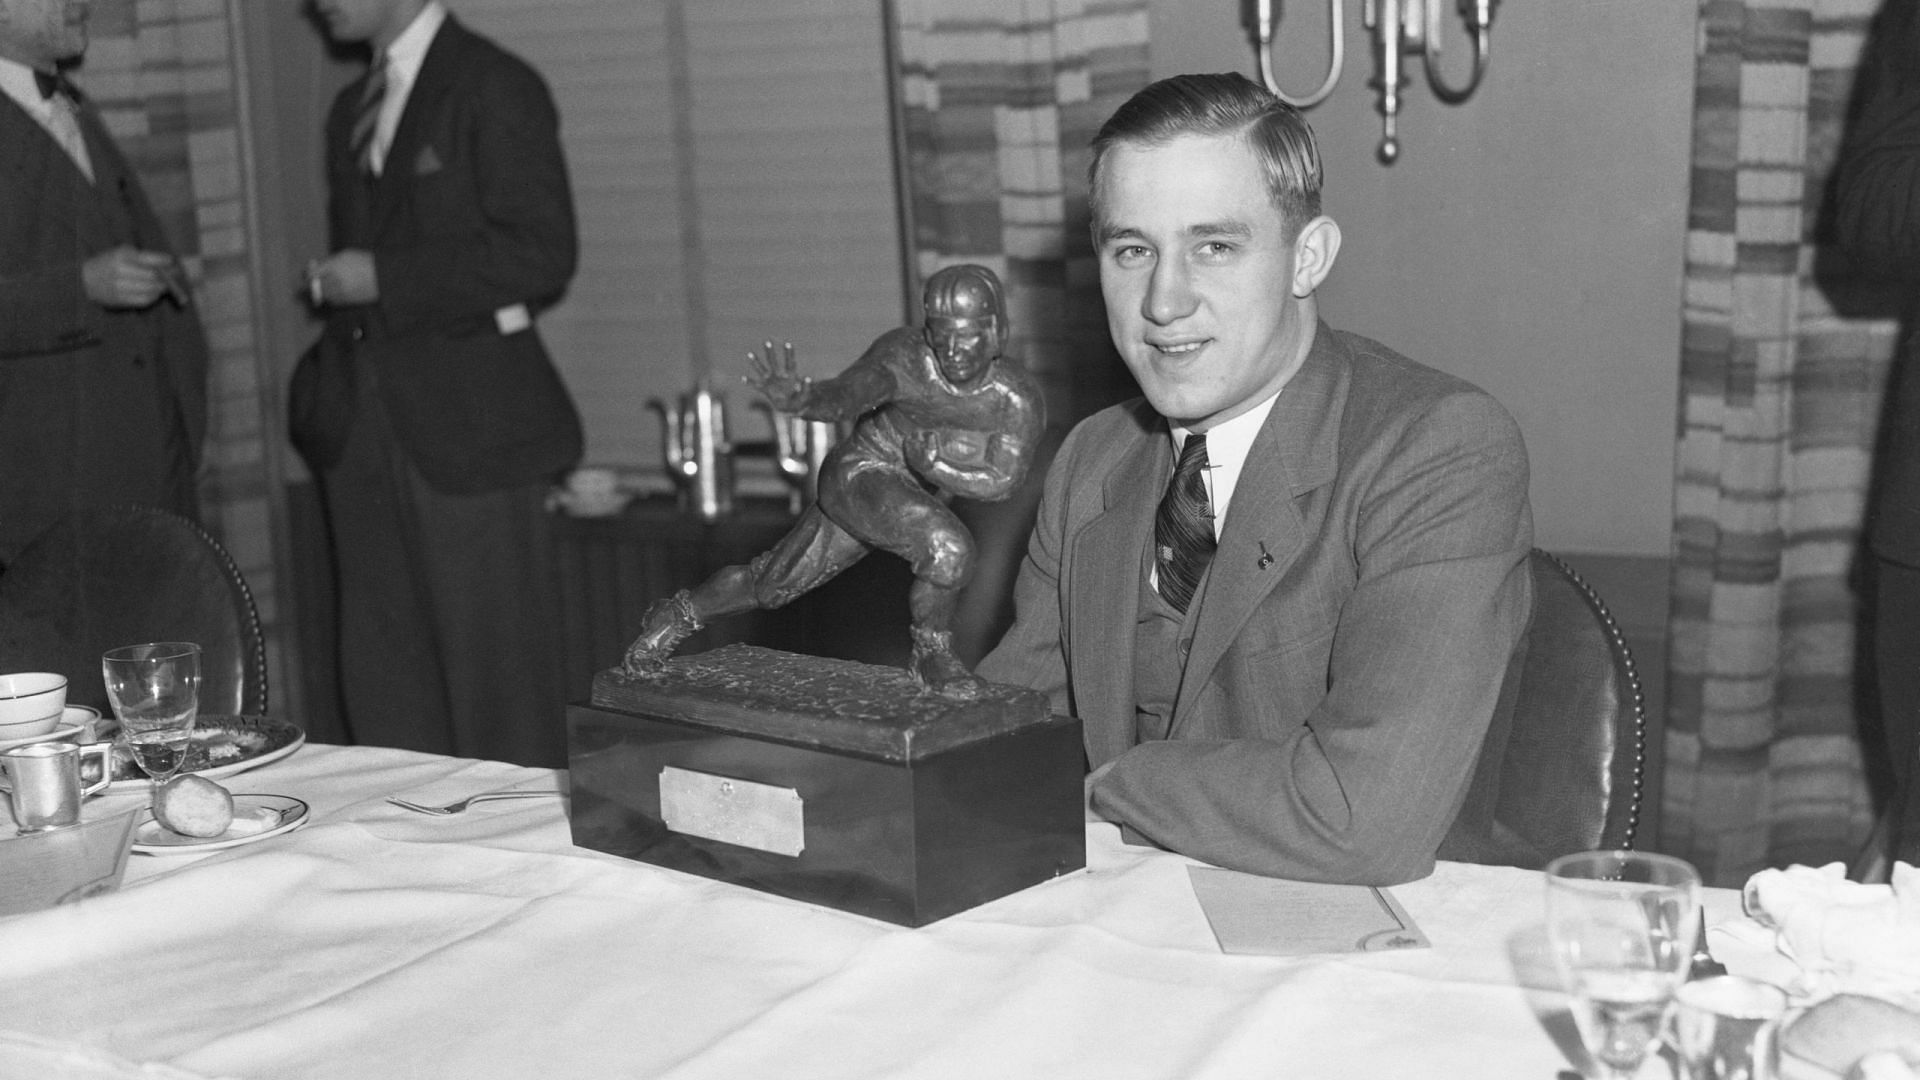 Jay Berwanger was the first player taken in the NFL draft. photo via www.history.com